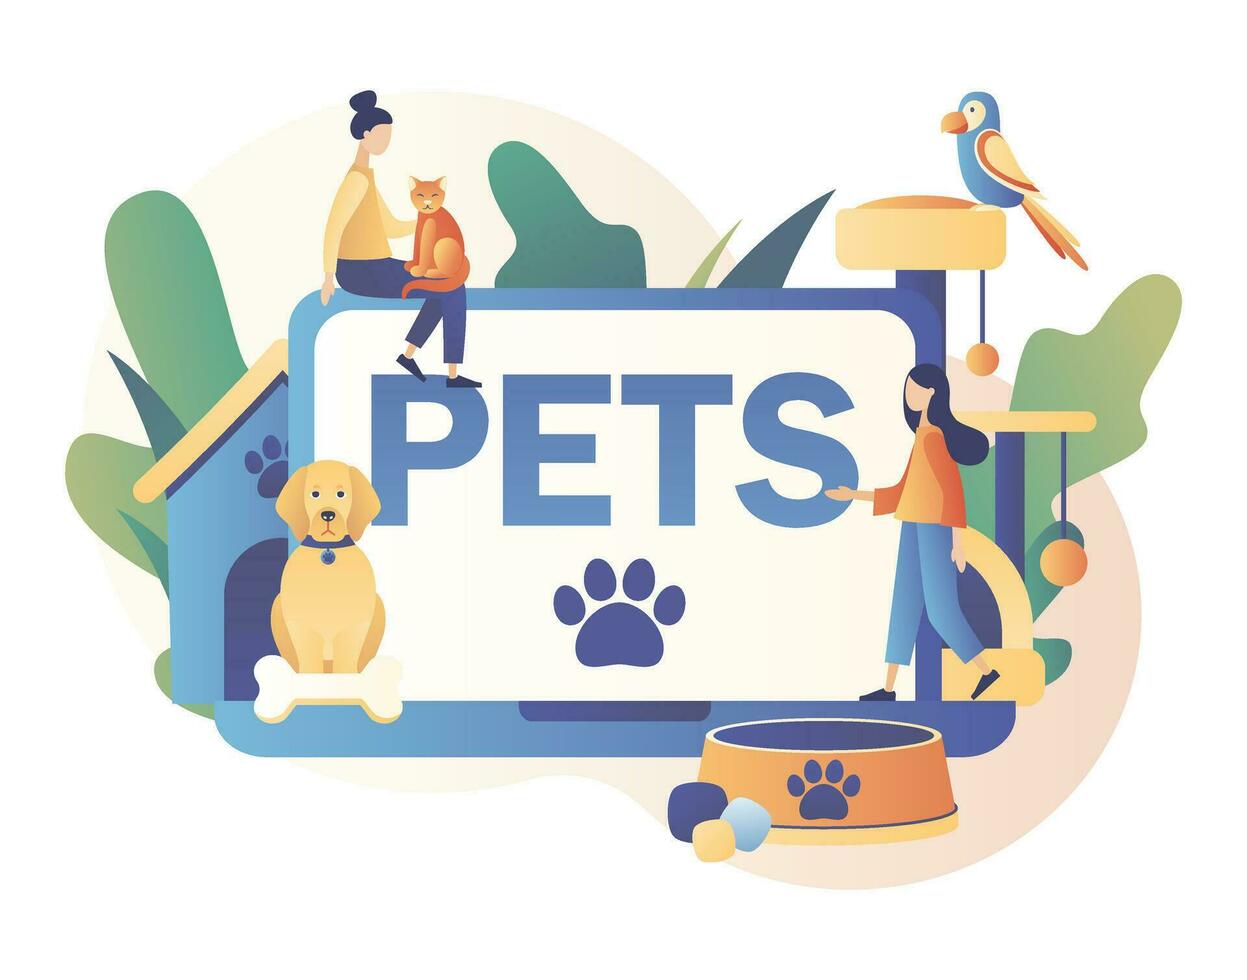 Online pets care services. Tiny people and Pet hotel, daycare, veterinary service. Pet shop. Modern flat cartoon style. Vector illustration on white background